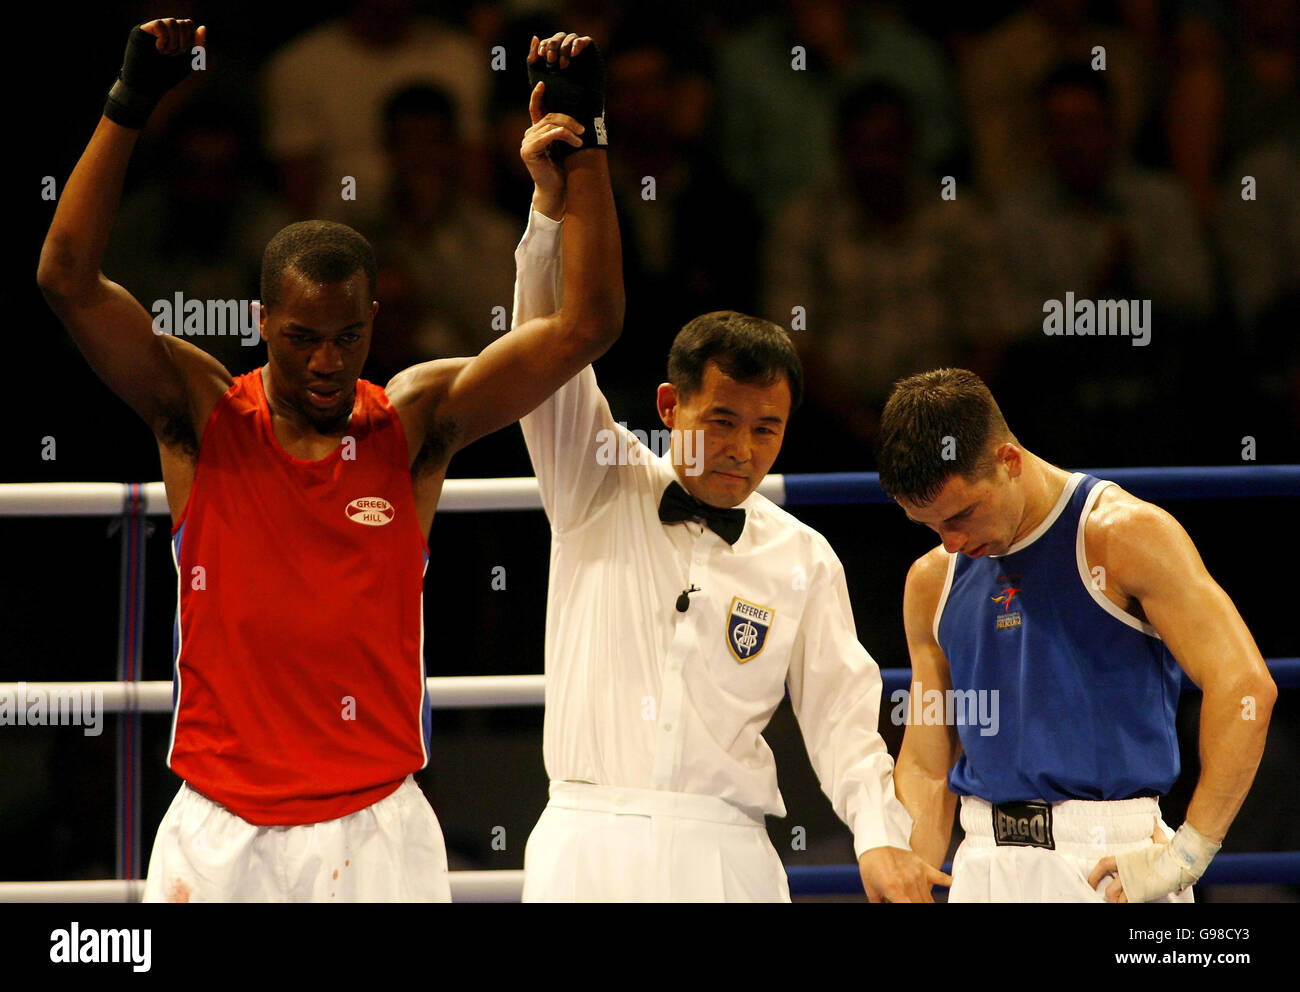 Aaron Thomas of Wales (r) hangs his head after losing to Malawi's Fundo Chifundo Mhura during their Welterweight Bout at the Melbourne Exhibition Centre, during the 18th Commonwealth Games in Melbourne, Australia, Friday 17th March, 2006. PRESS ASSOCIATION Photo. Photo credit should read: Gareth Copley/PA. Stock Photo